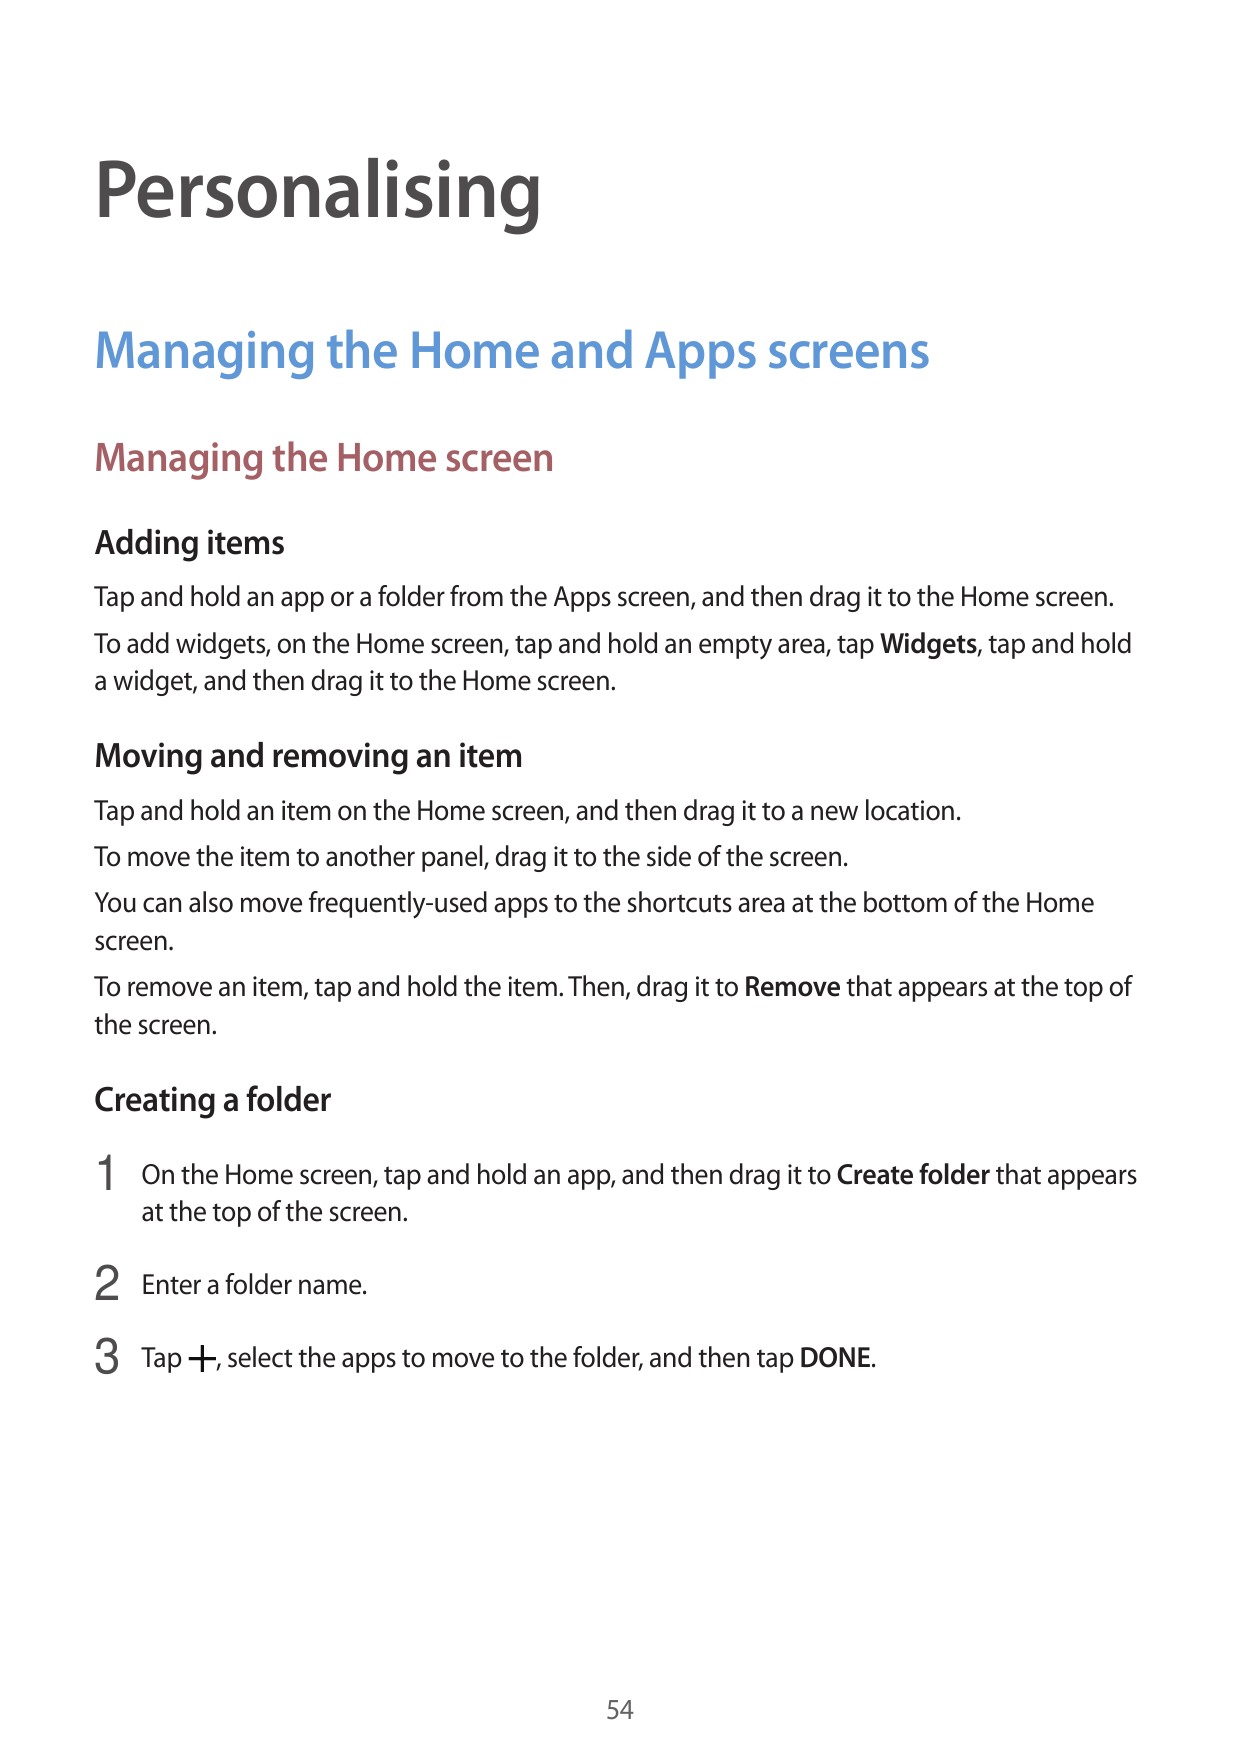 PersonalisingManaging the Home and Apps screensManaging the Home screenAdding itemsTap and hold an app or a folder from the Apps